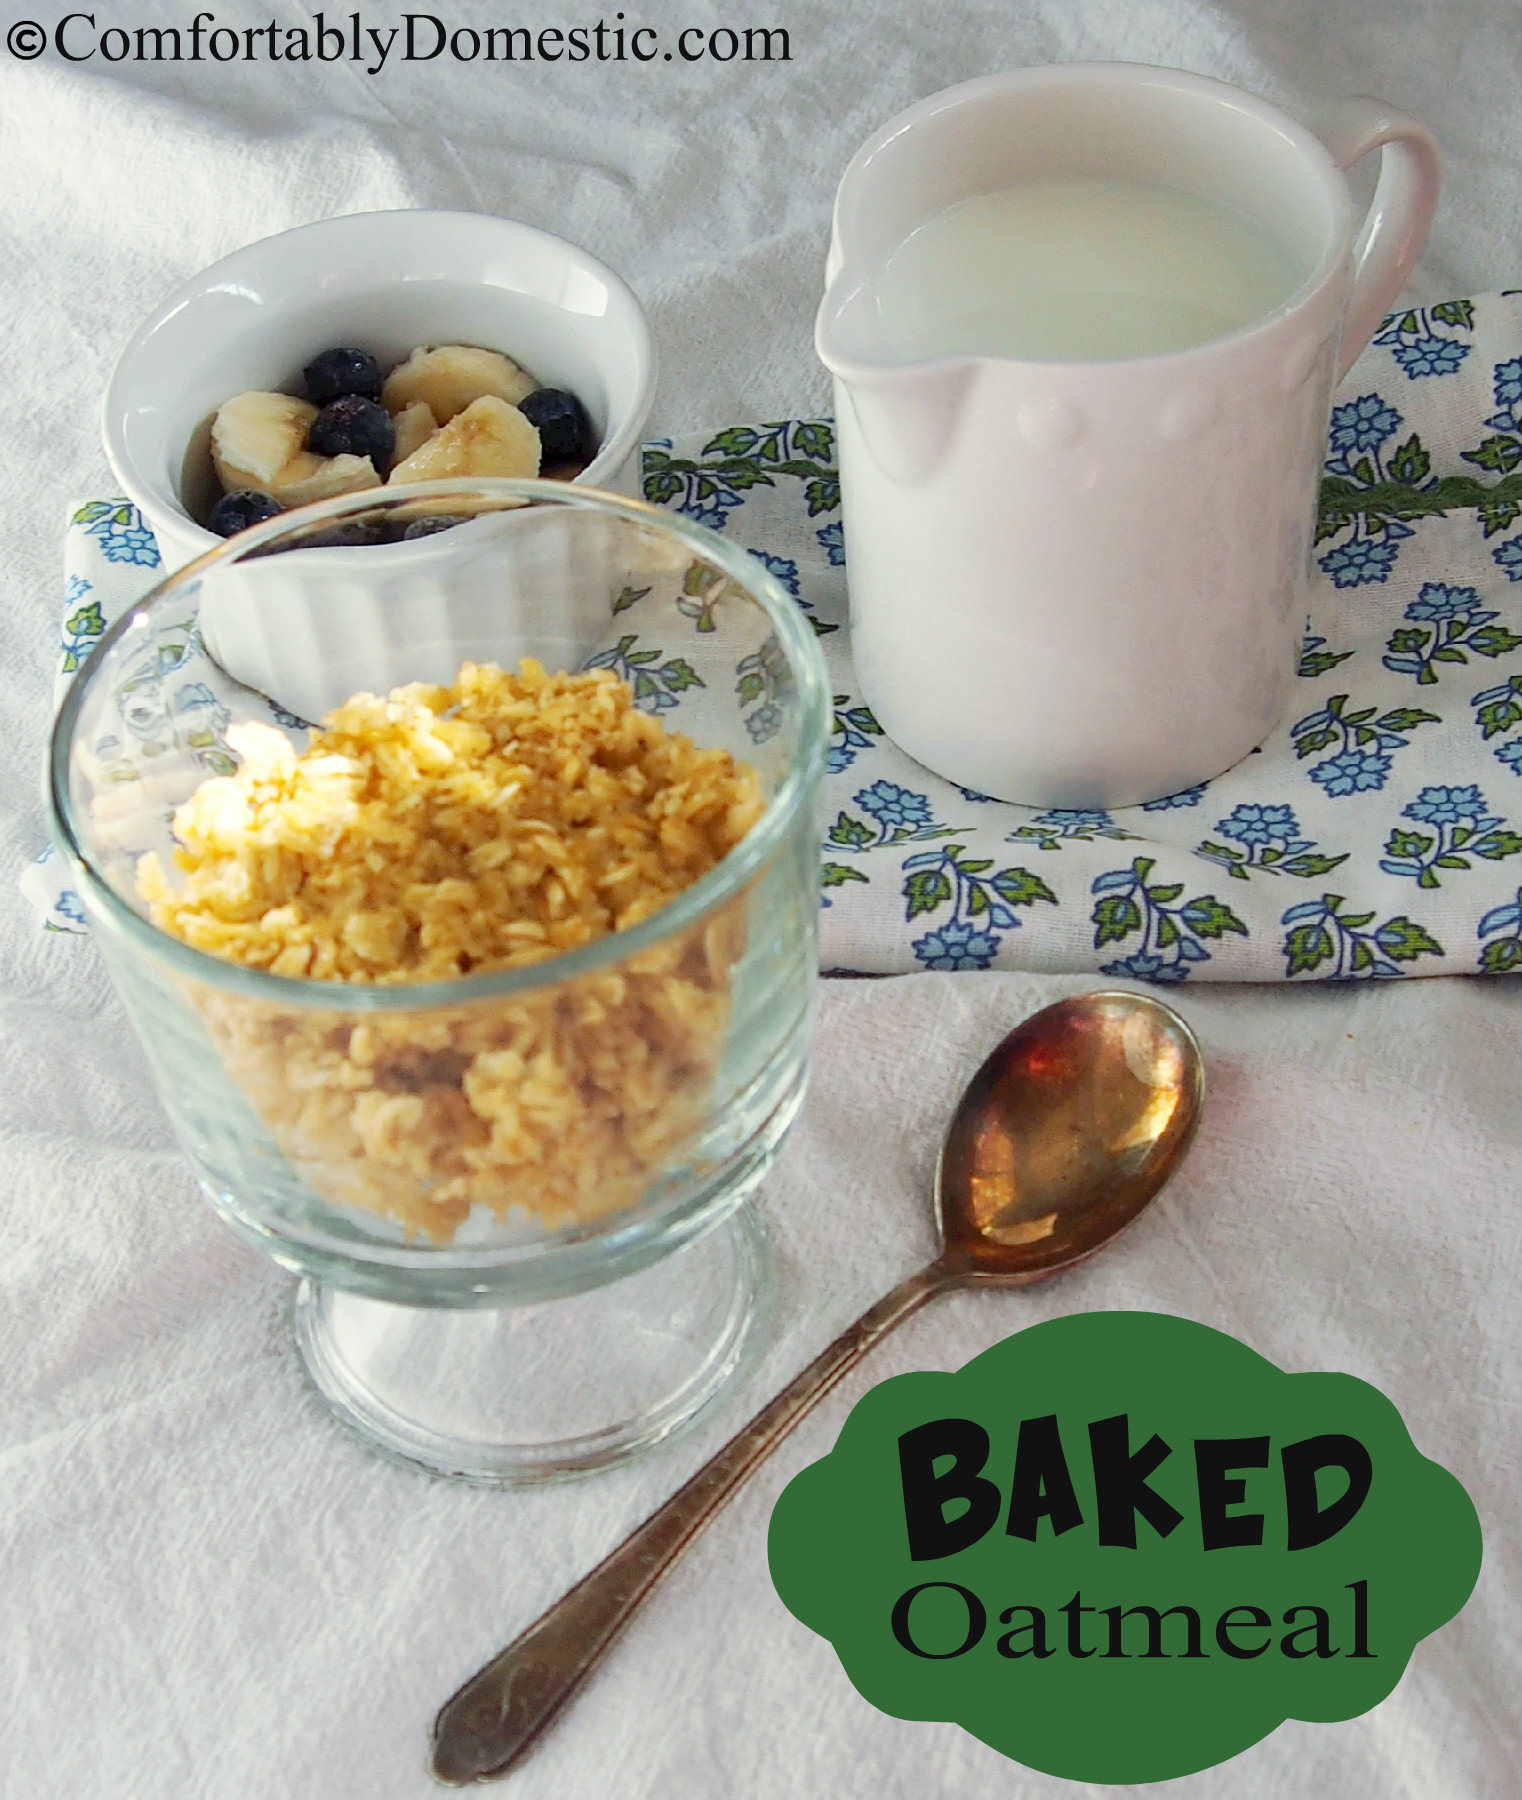 Hearty Baked Oatmeal - Get the recipe from ComfortablyDomestic.com